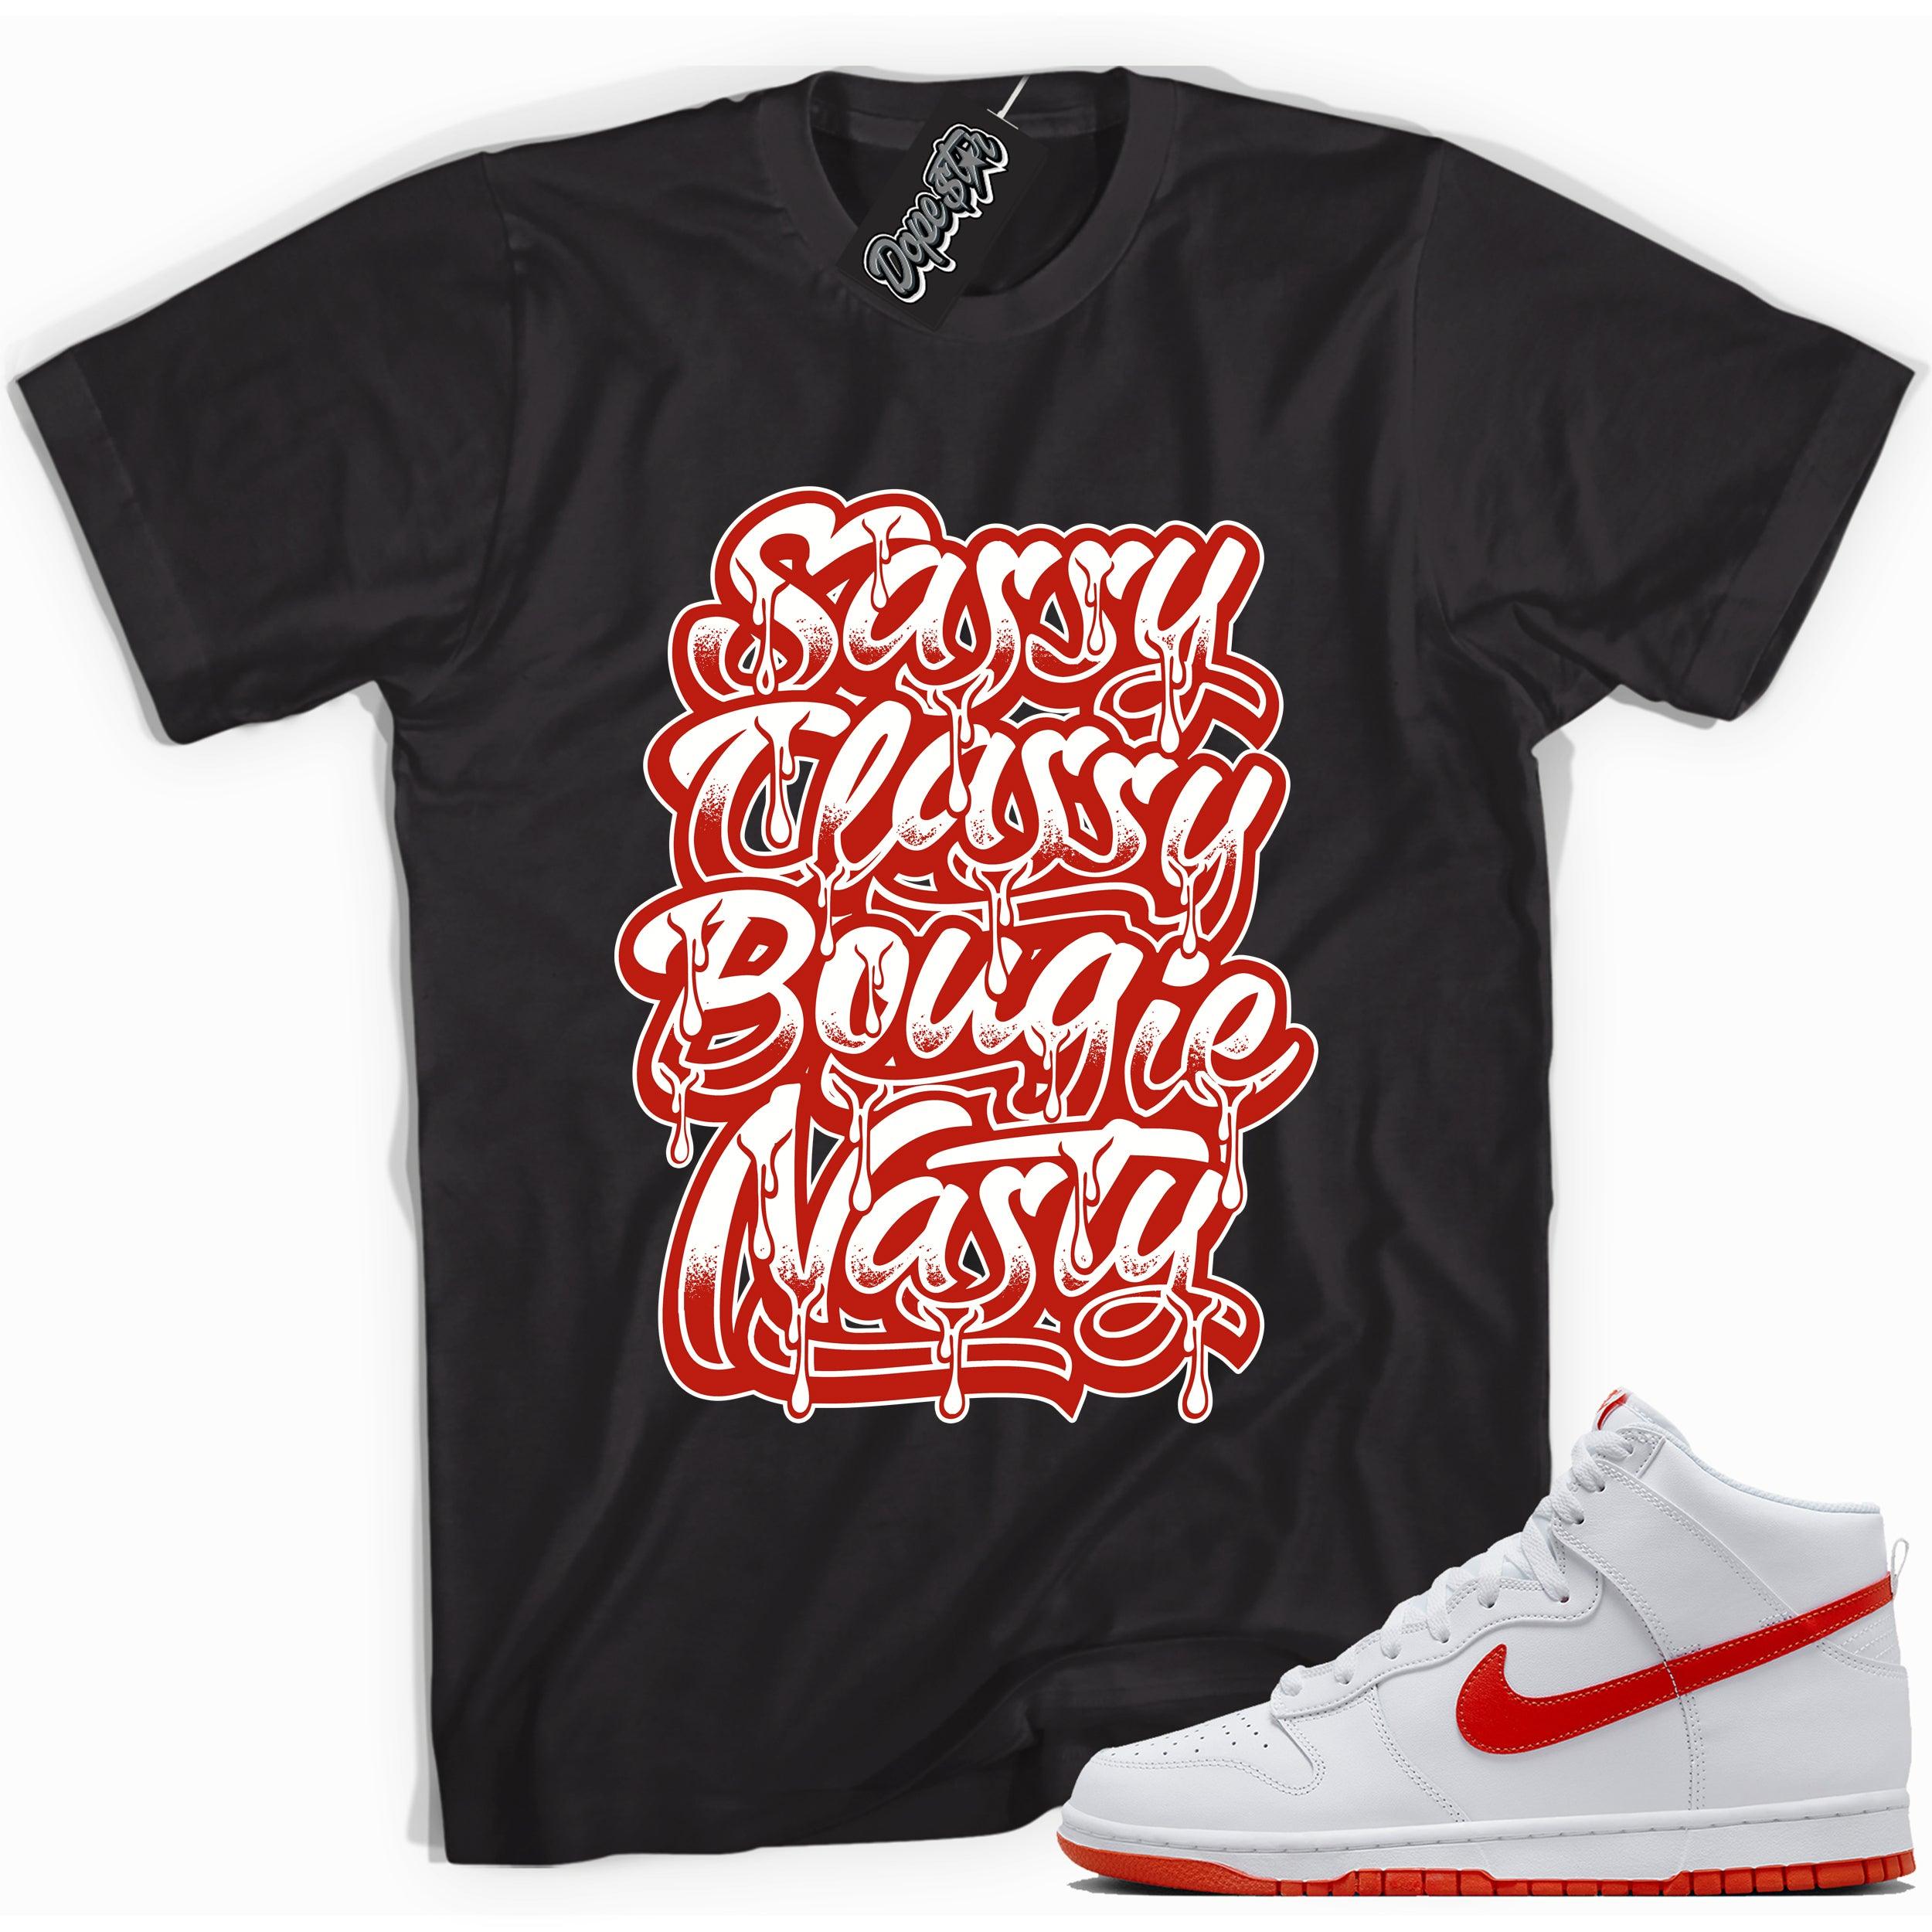 Cool black graphic tee with 'sassy classy bougie nasty' print, that perfectly matches Nike Dunk High White Picante Red sneakers.